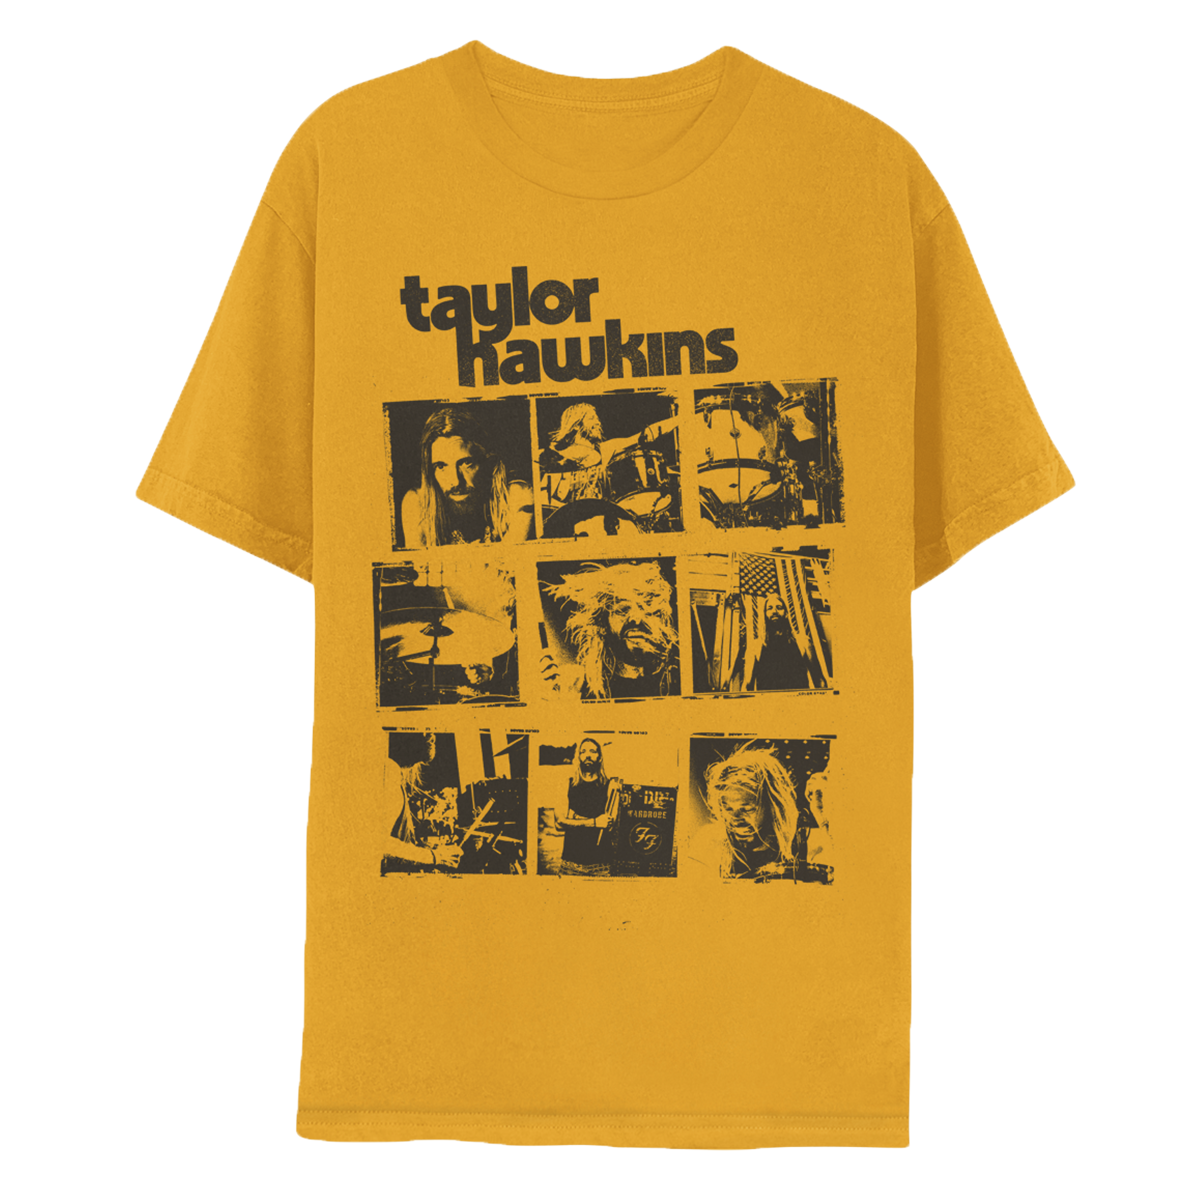 Taylor Hawkins Tribute Concert Tee - Mustard - Benefitting Music Cares (USA) and Music Support (UK)